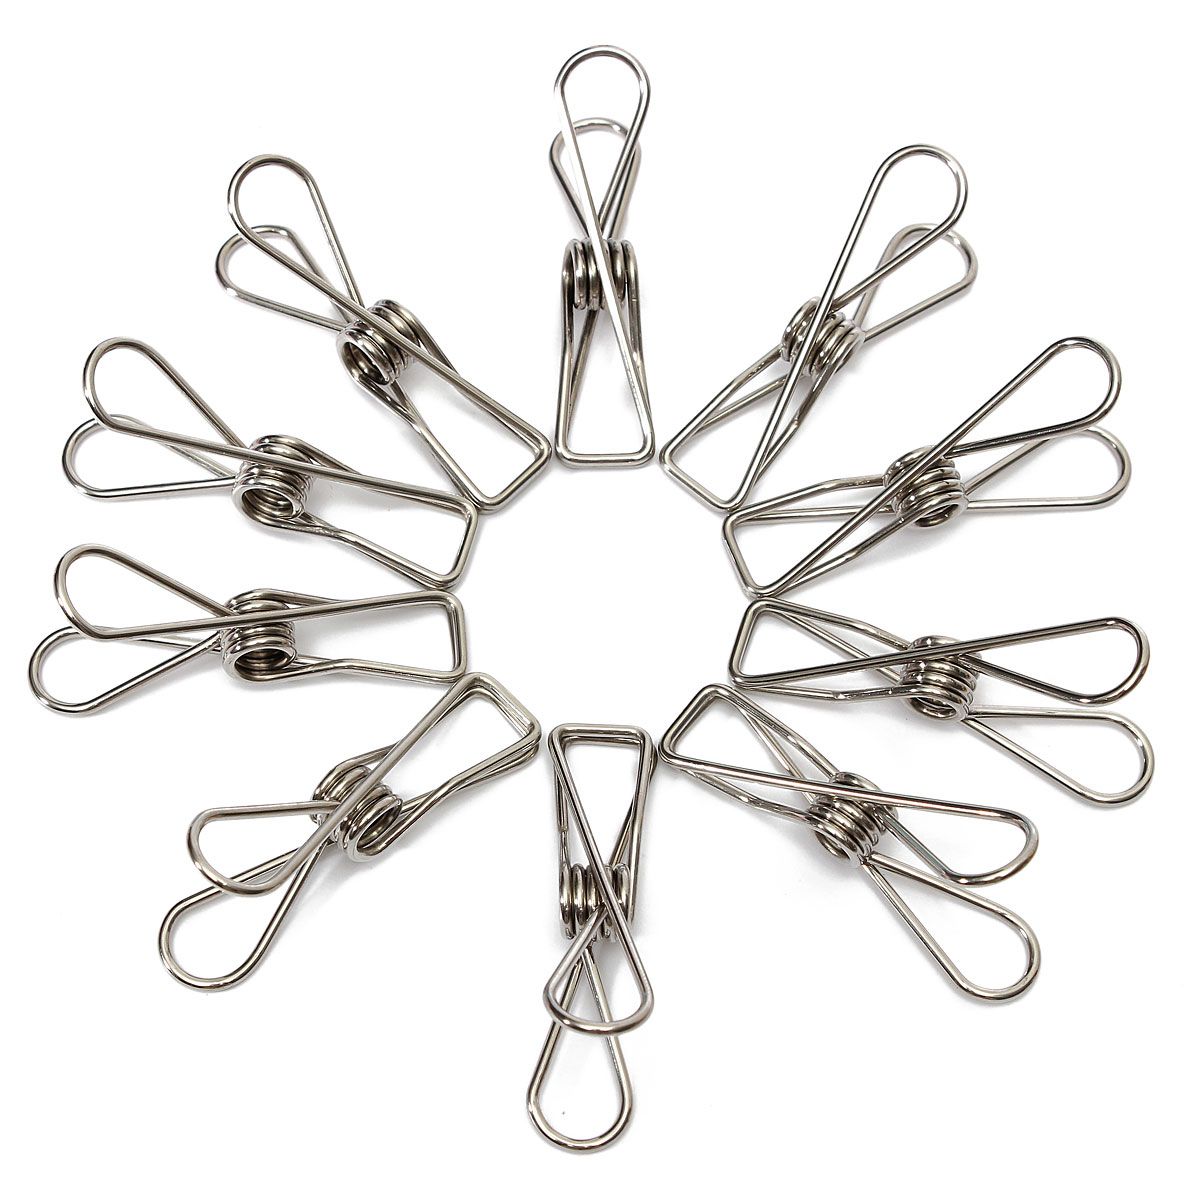 10Pcs-Stainless-Steel-Clothes-Pegs-Hanging-Pin-Laundry-Windproof-Clips-Home-Clamps-Clothespins-1333048